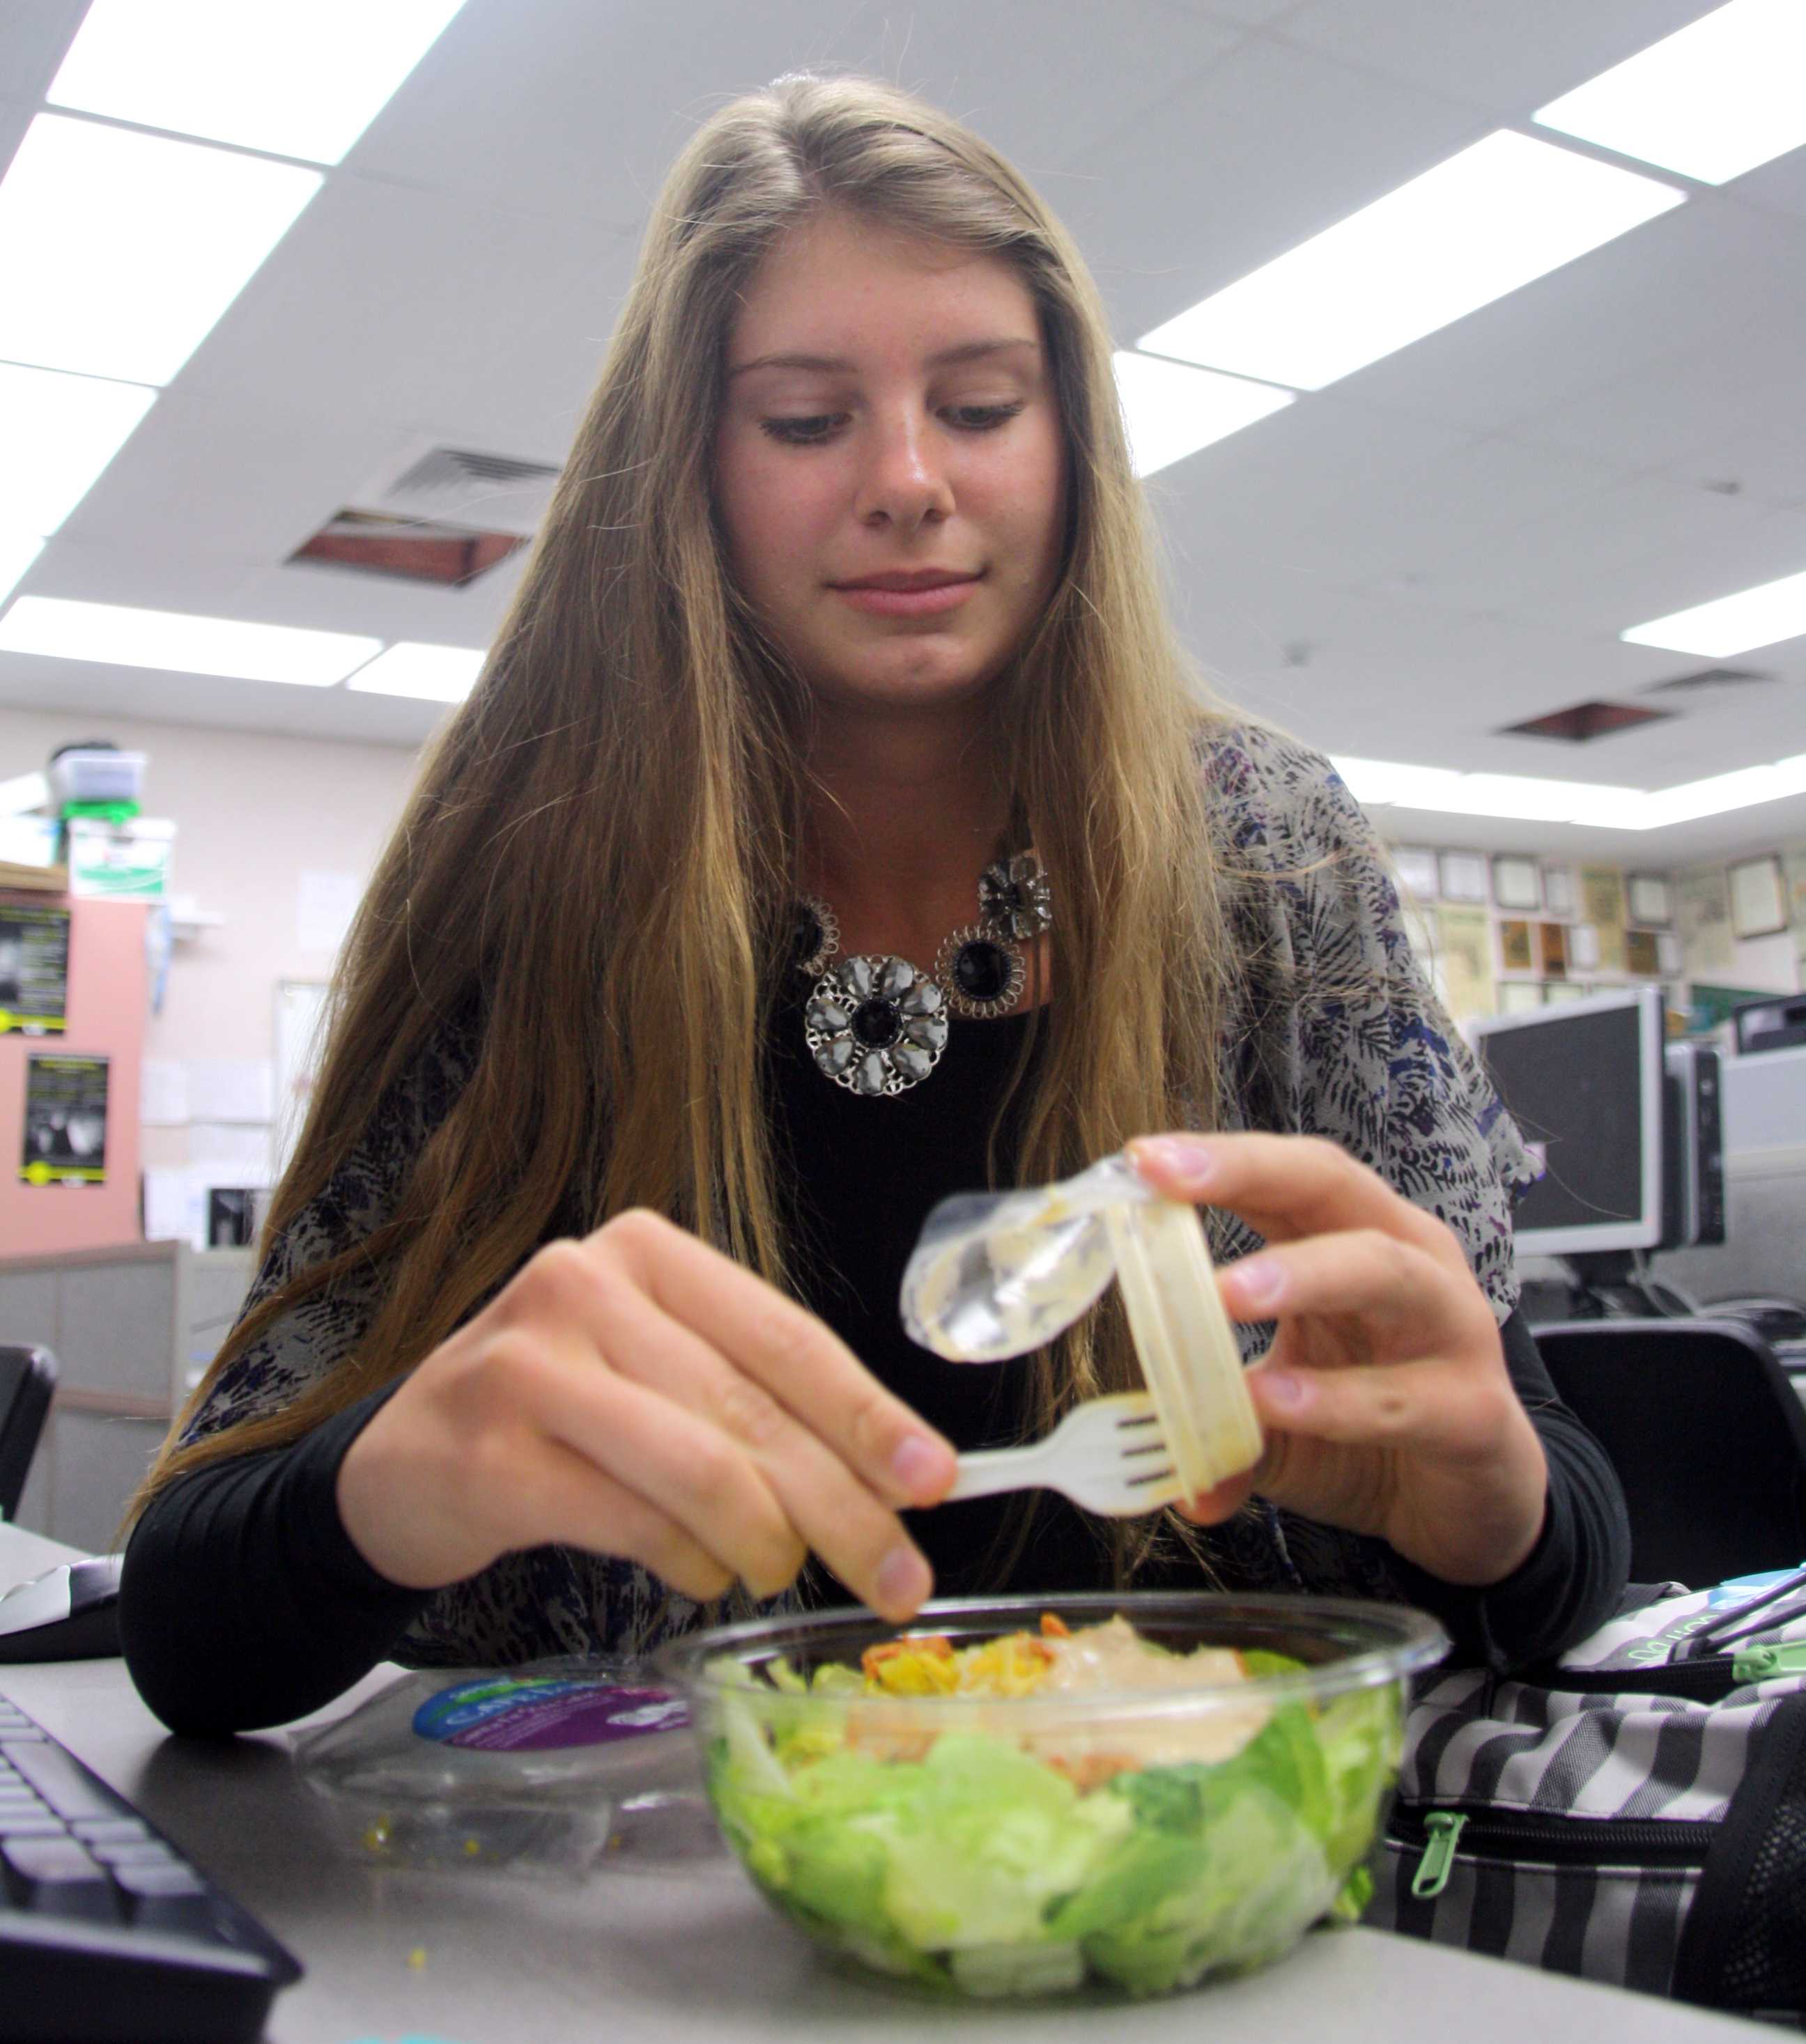 Behind a salad, junior Frances Strnad prepares her Cesar salad on April 16 during lunch. The salad came in package that contained cheese, croutons, and chicken. Not only did she bring a salad, she also brought water and apple slices to accommodate her healthy living style. "Healthy eating is a priority in my household and I really enjoy that. I feel more energized and focused at school. Healthy eating prevents me from becoming lazy and tired," Strnad said. Photo by Ambreen Siddiqui